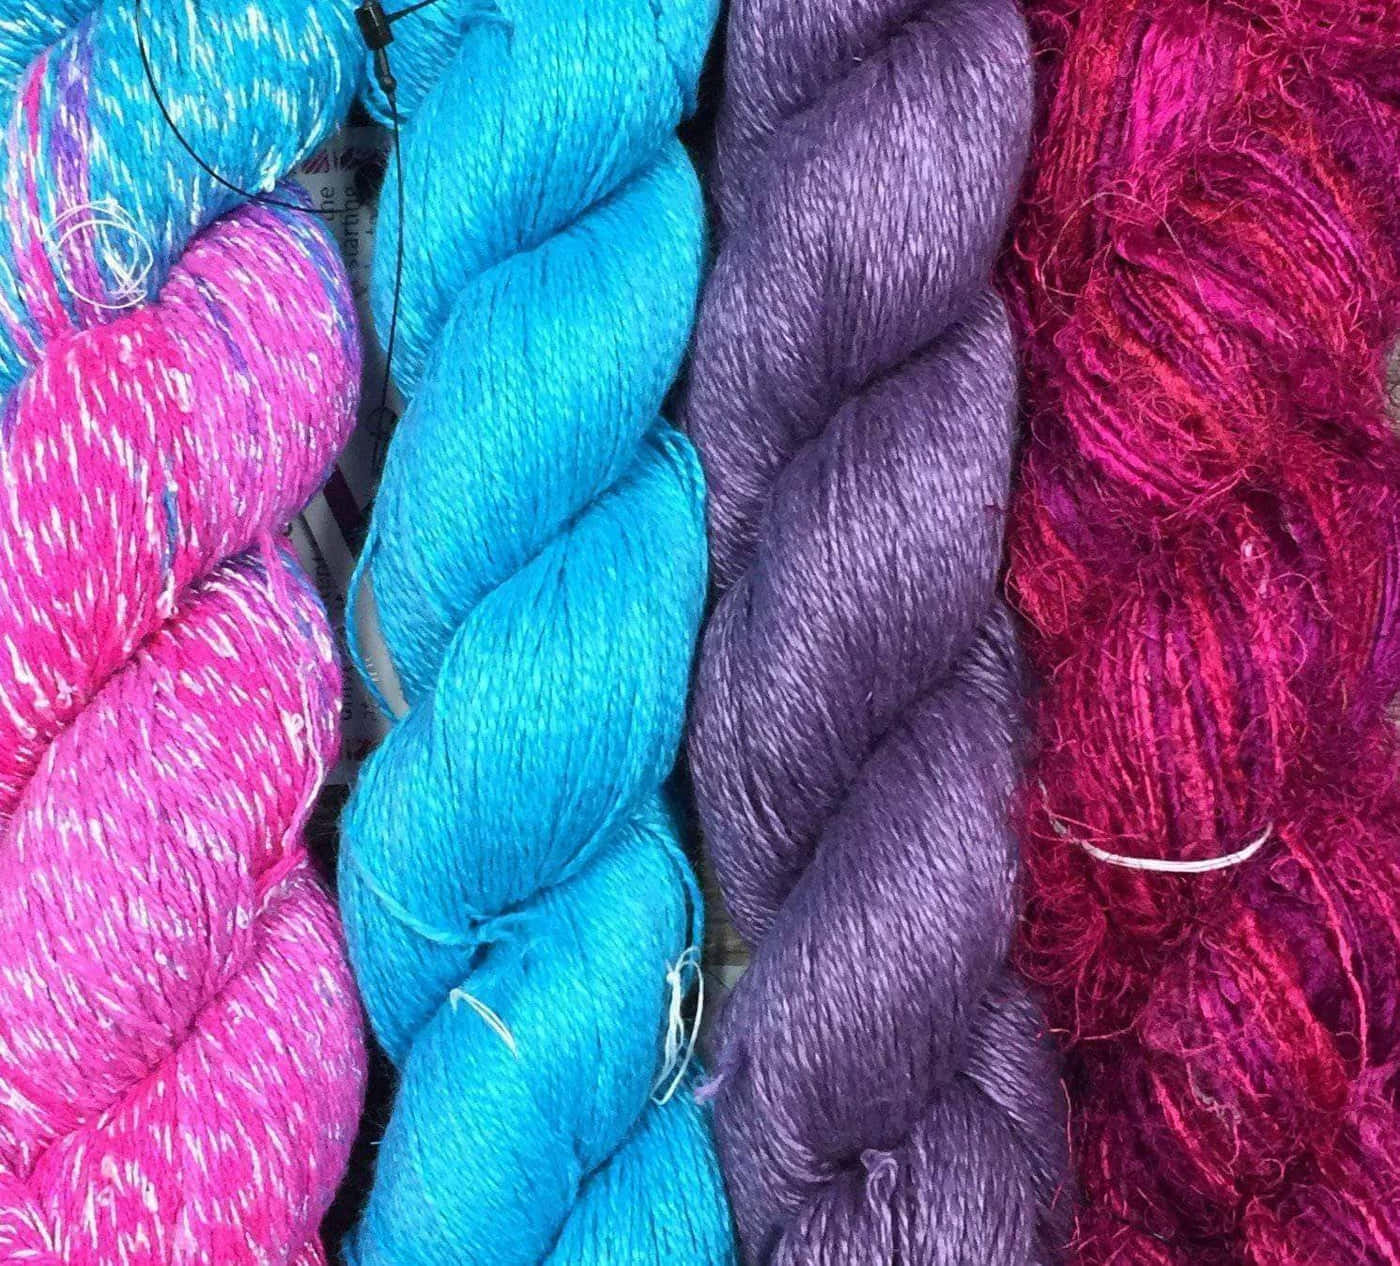 Vibrant Knitting Spincyle Wools Wallpaper